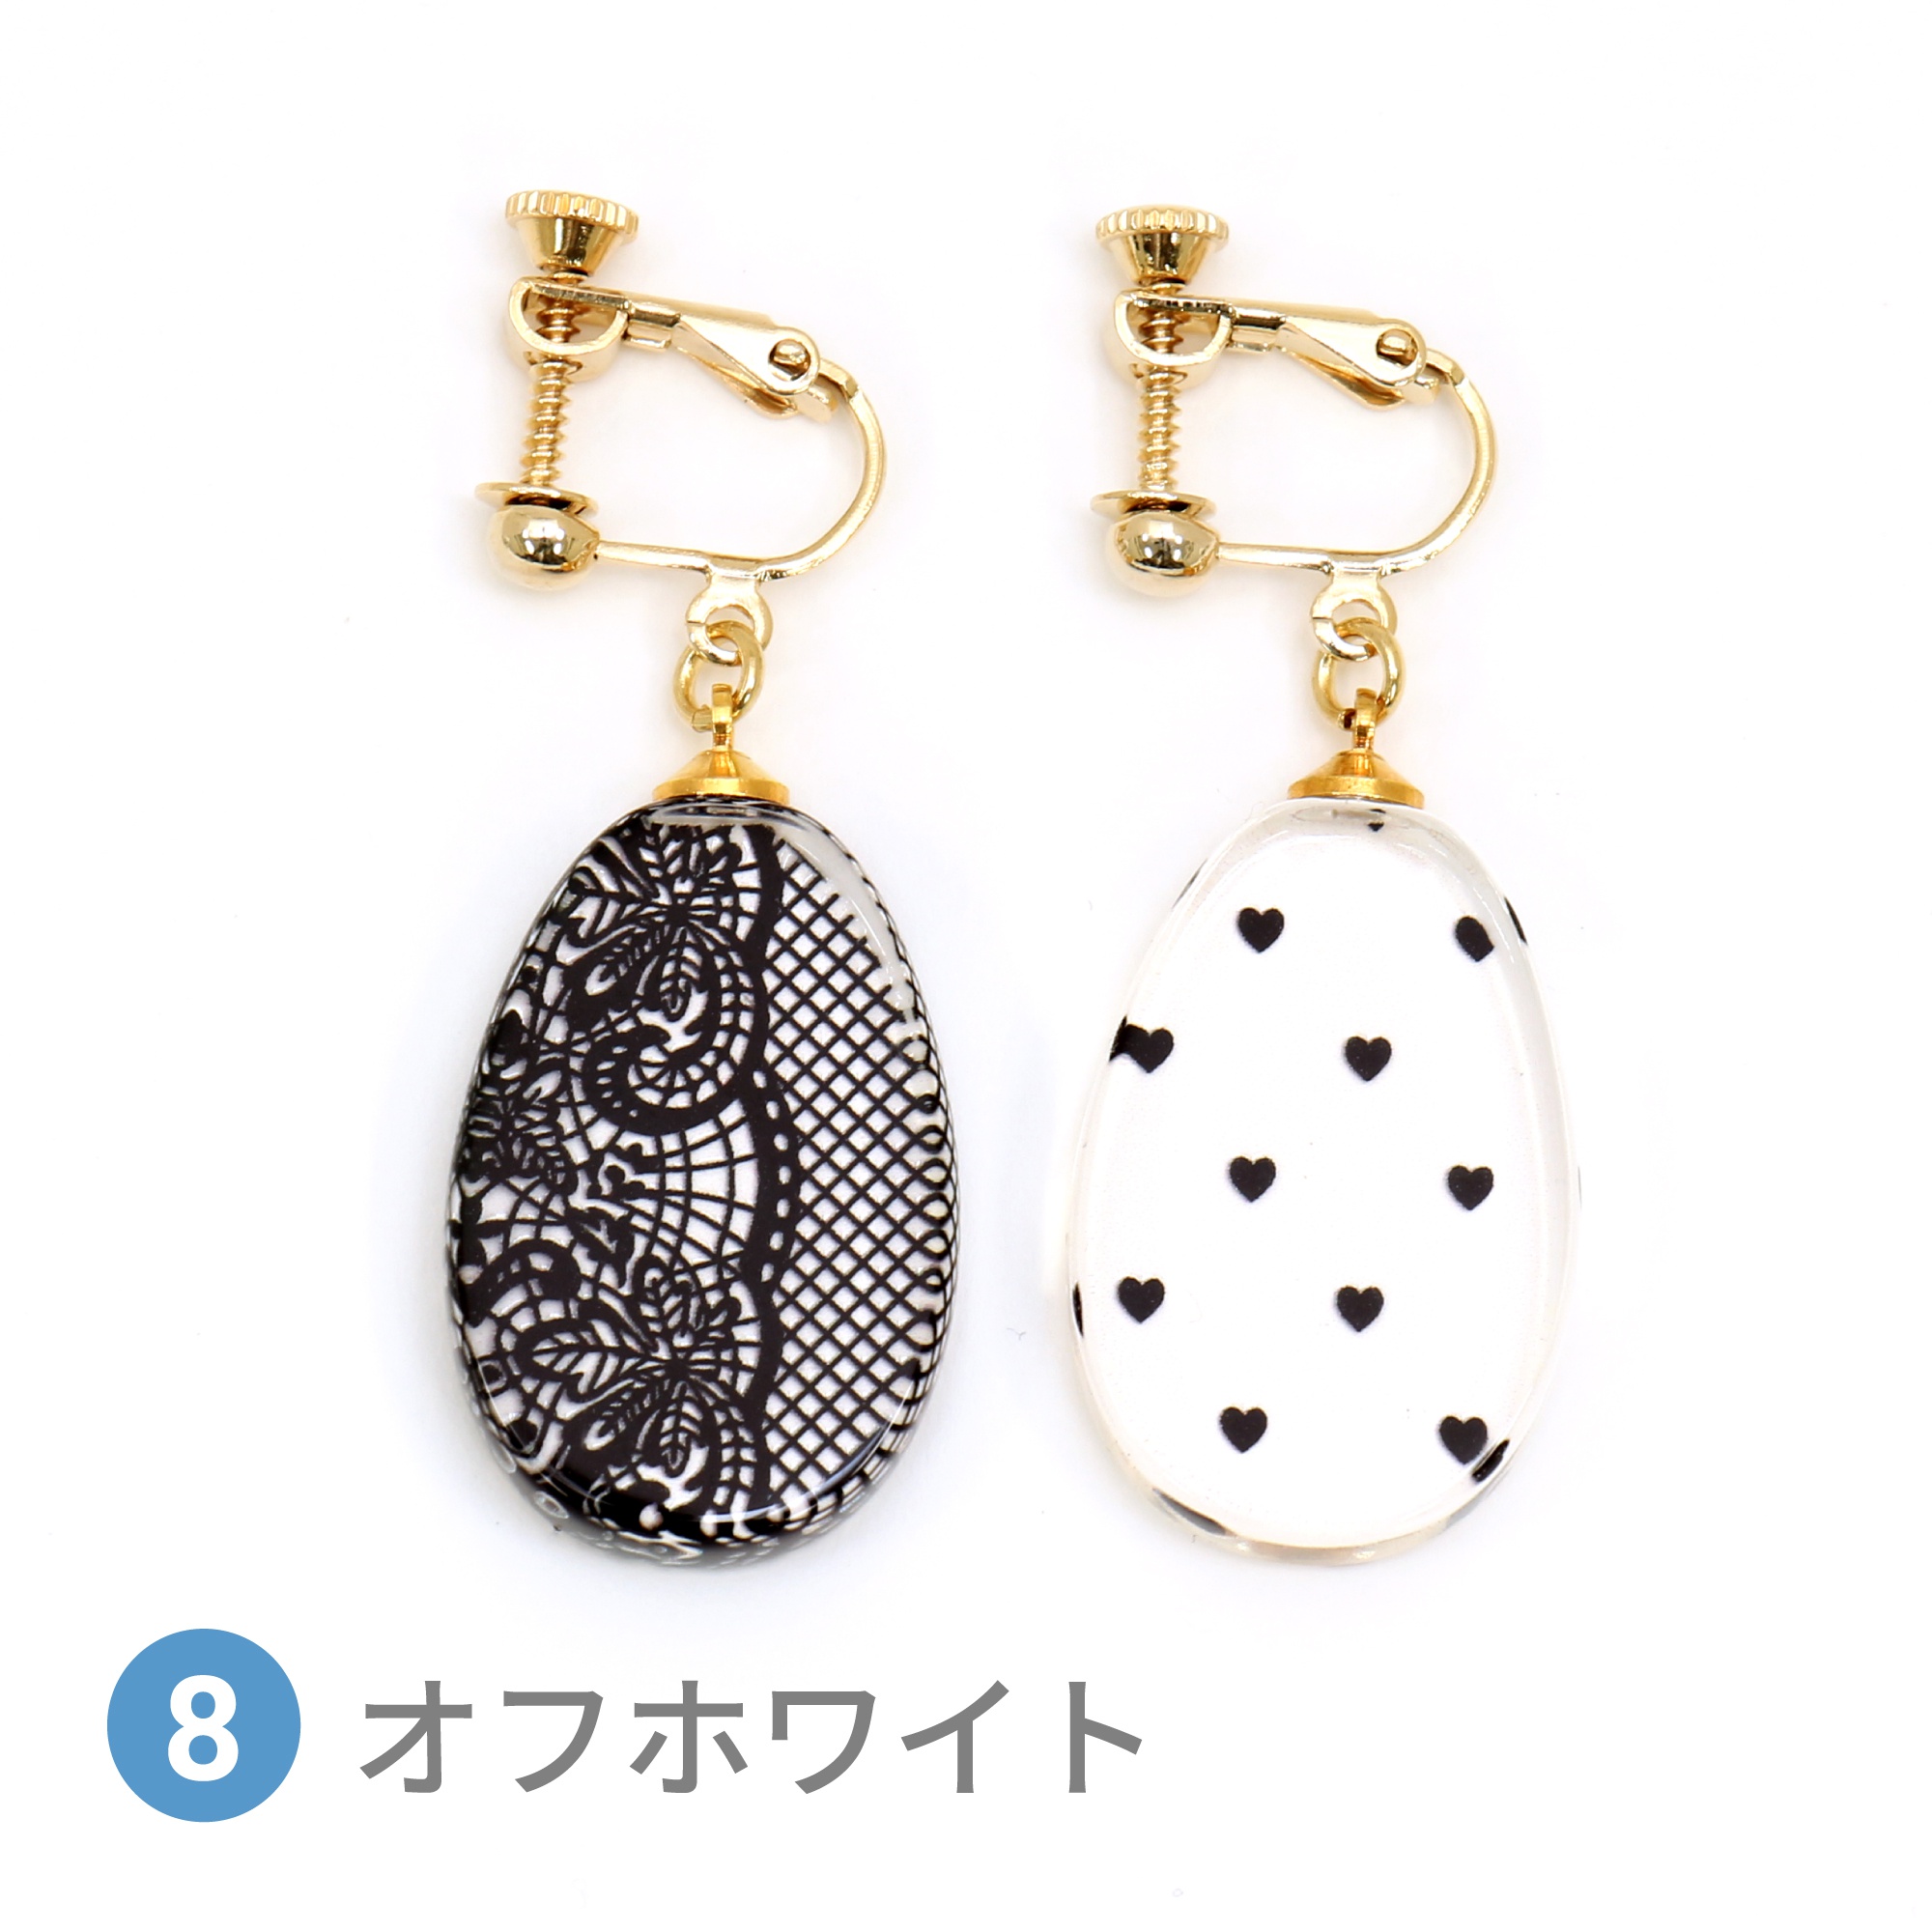 Glass accessories Earring LACE&HEART off-white drop shape